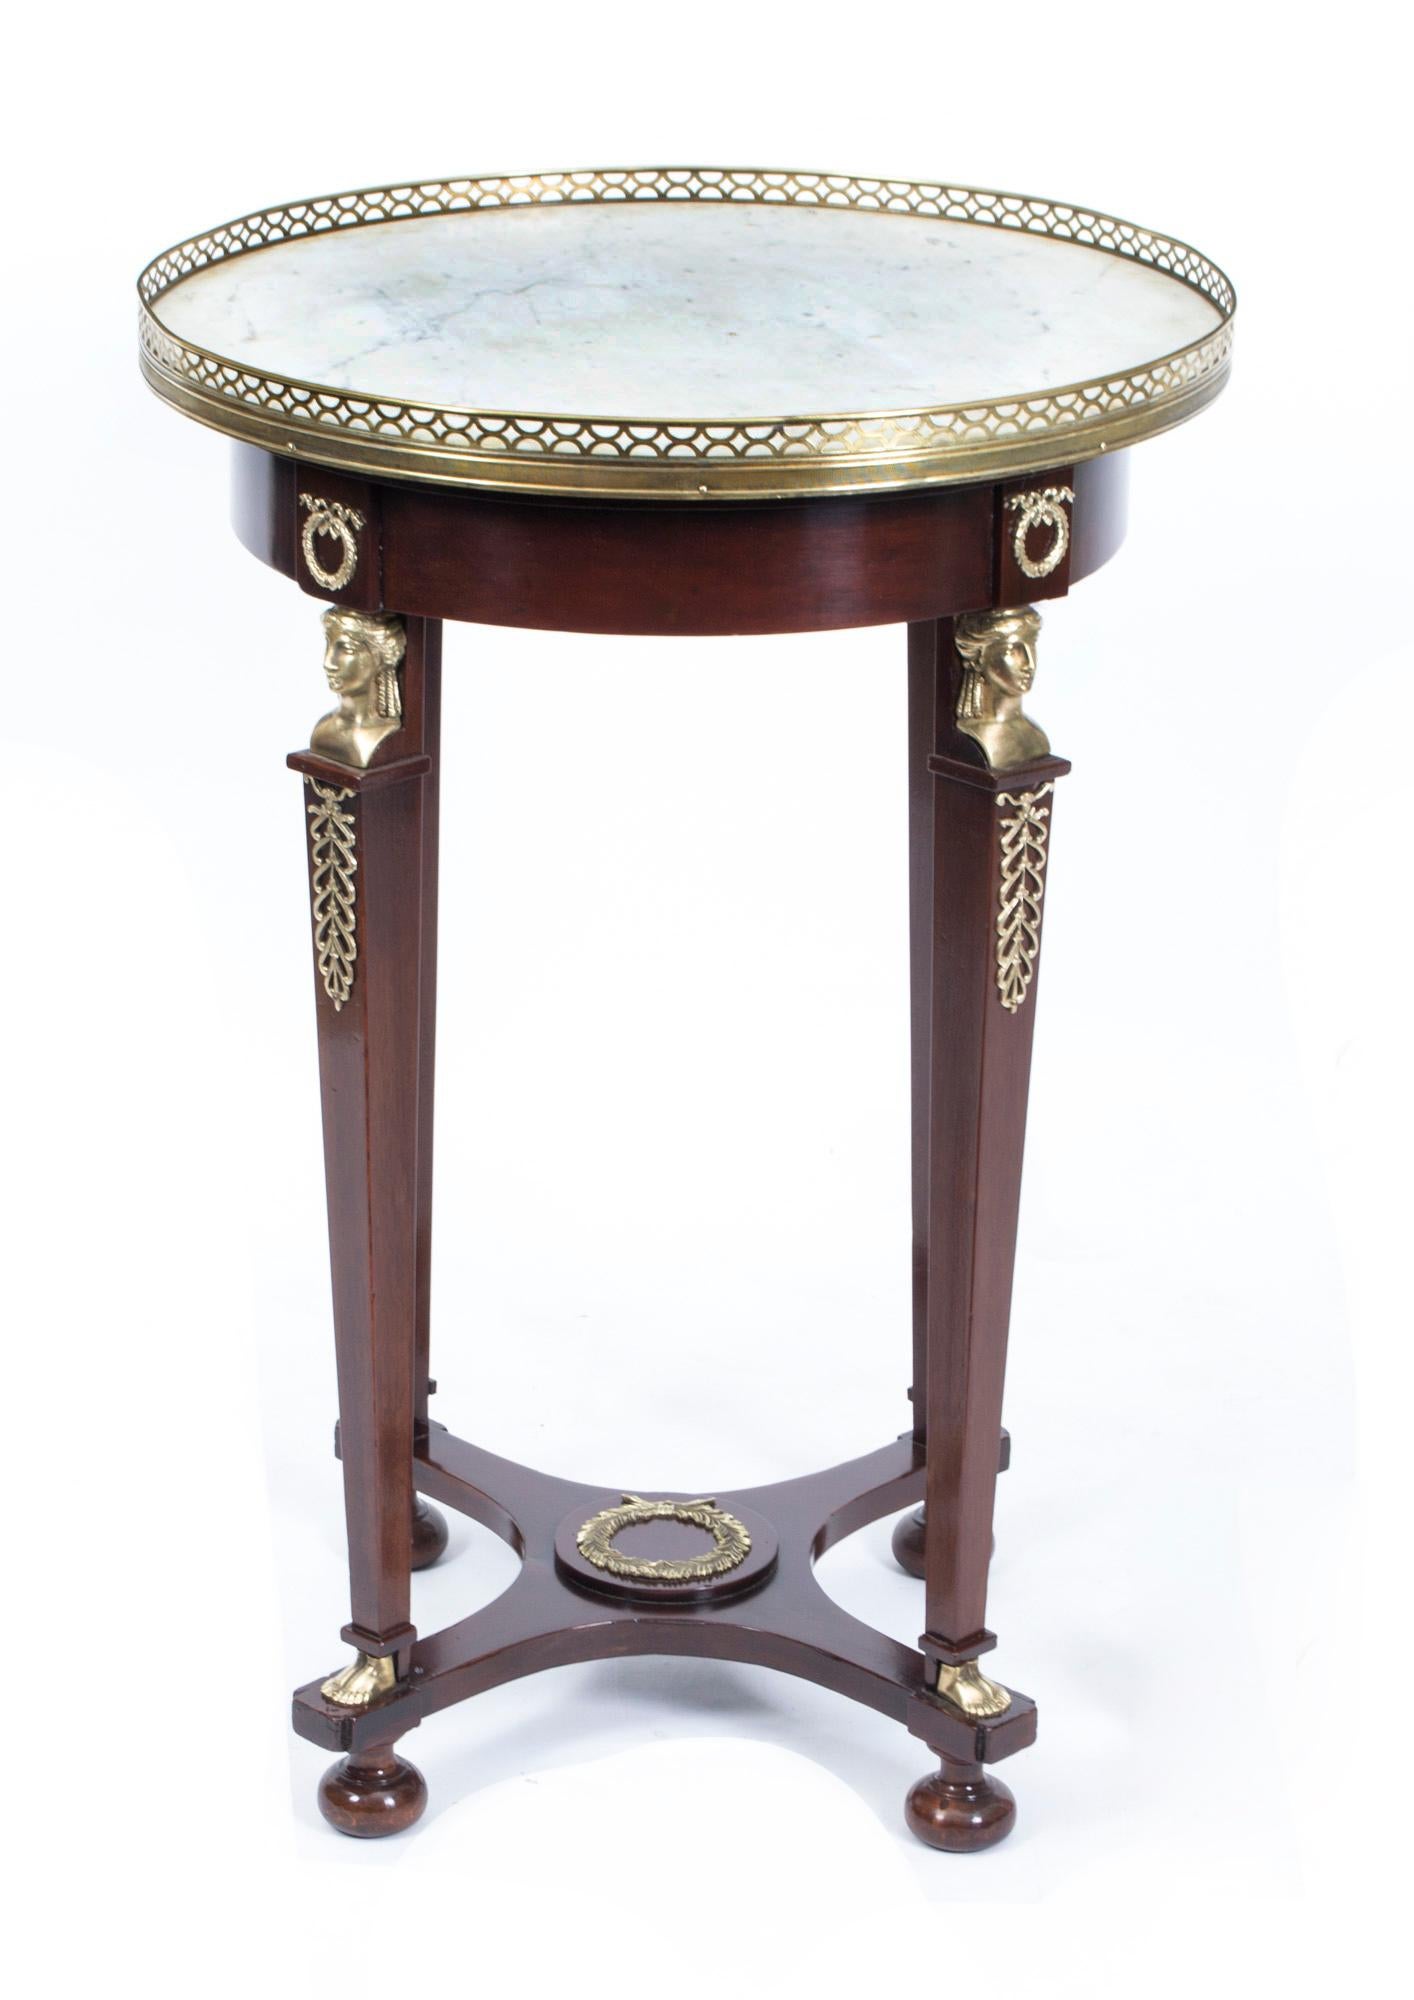 This is a beautiful antique French Empire circular centre table with ornate ormolu decoration typical of the Empire period and a beautiful inset white 